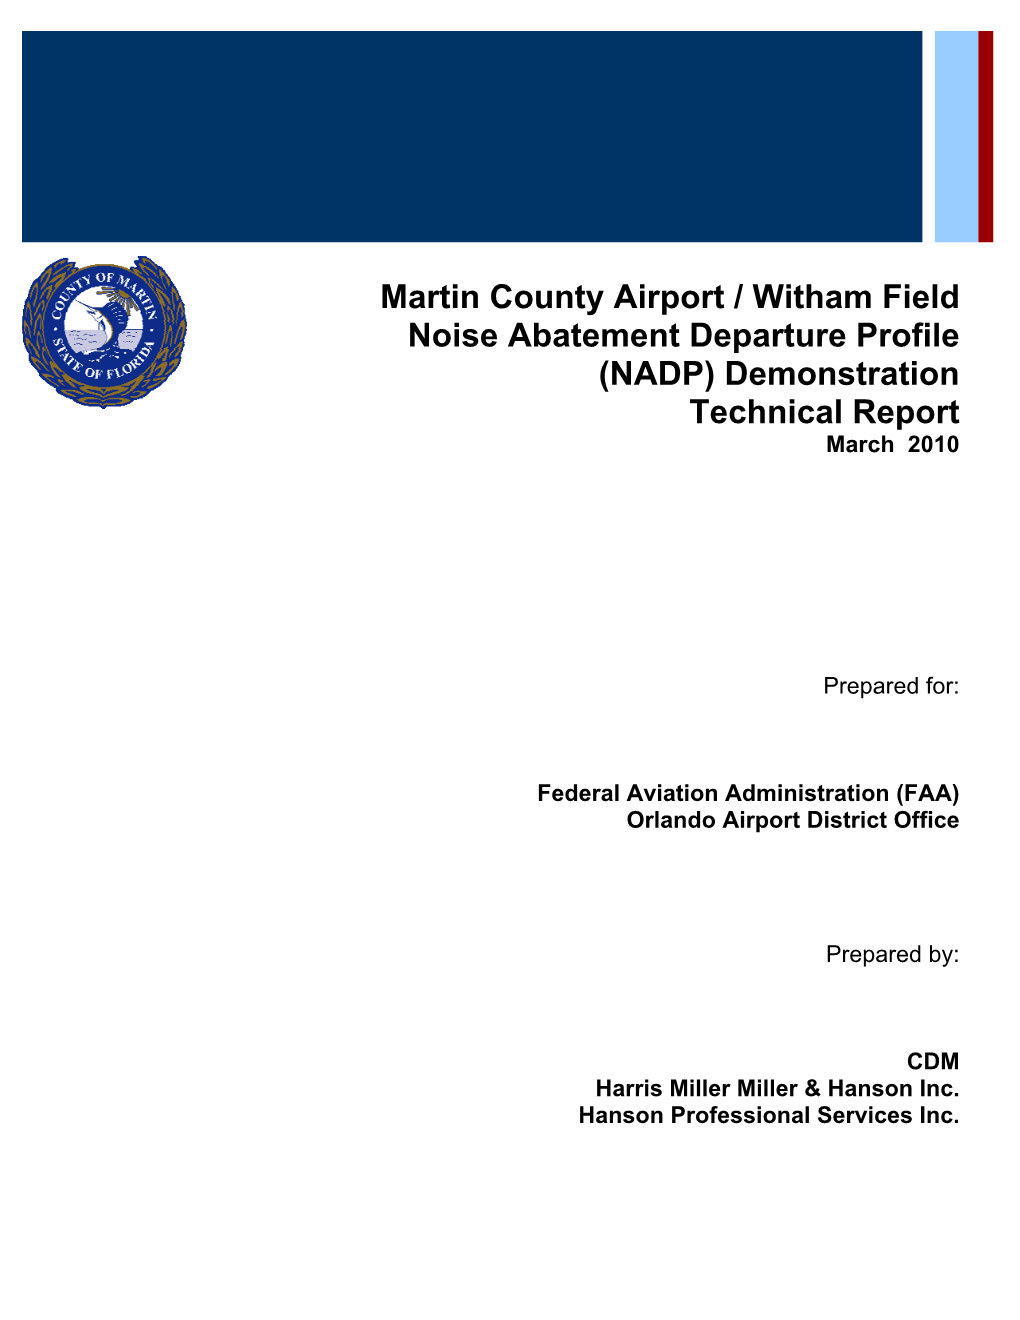 Martin County Airport / Witham Field Noise Abatement Departure Profile